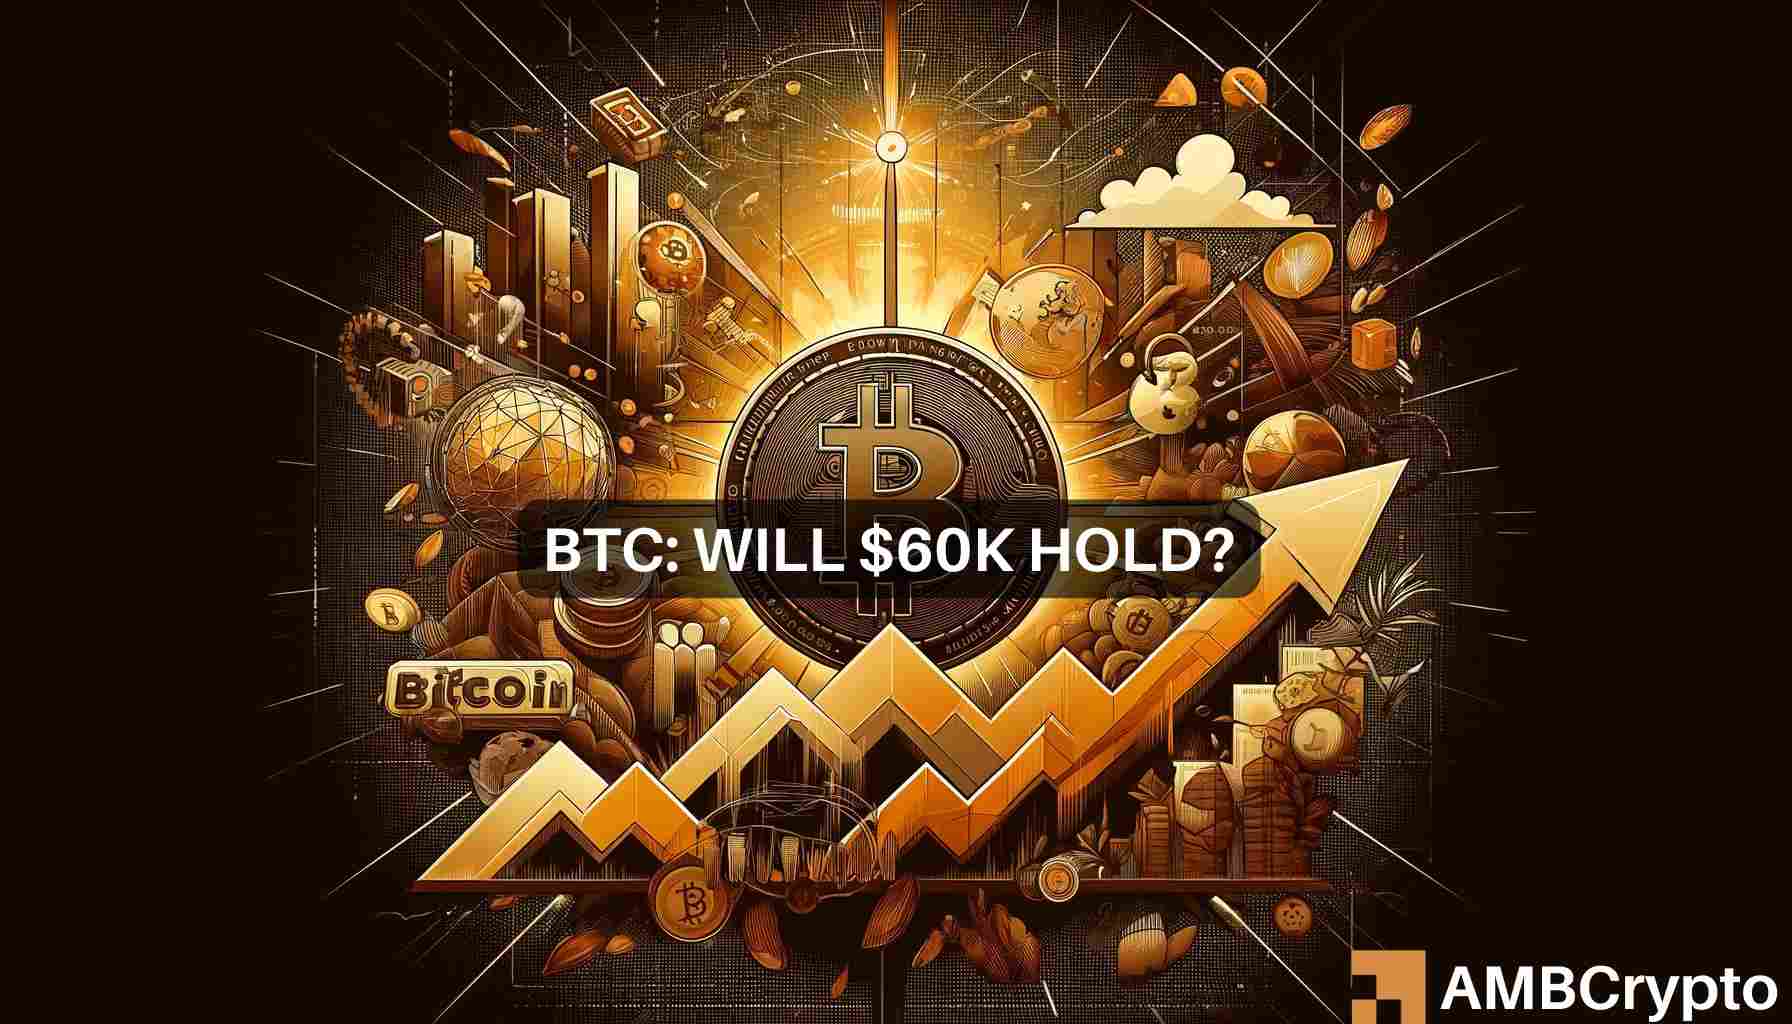 Bitcoin at $60K: Why Peter Schiff sees it as risk level for MicroStrategy